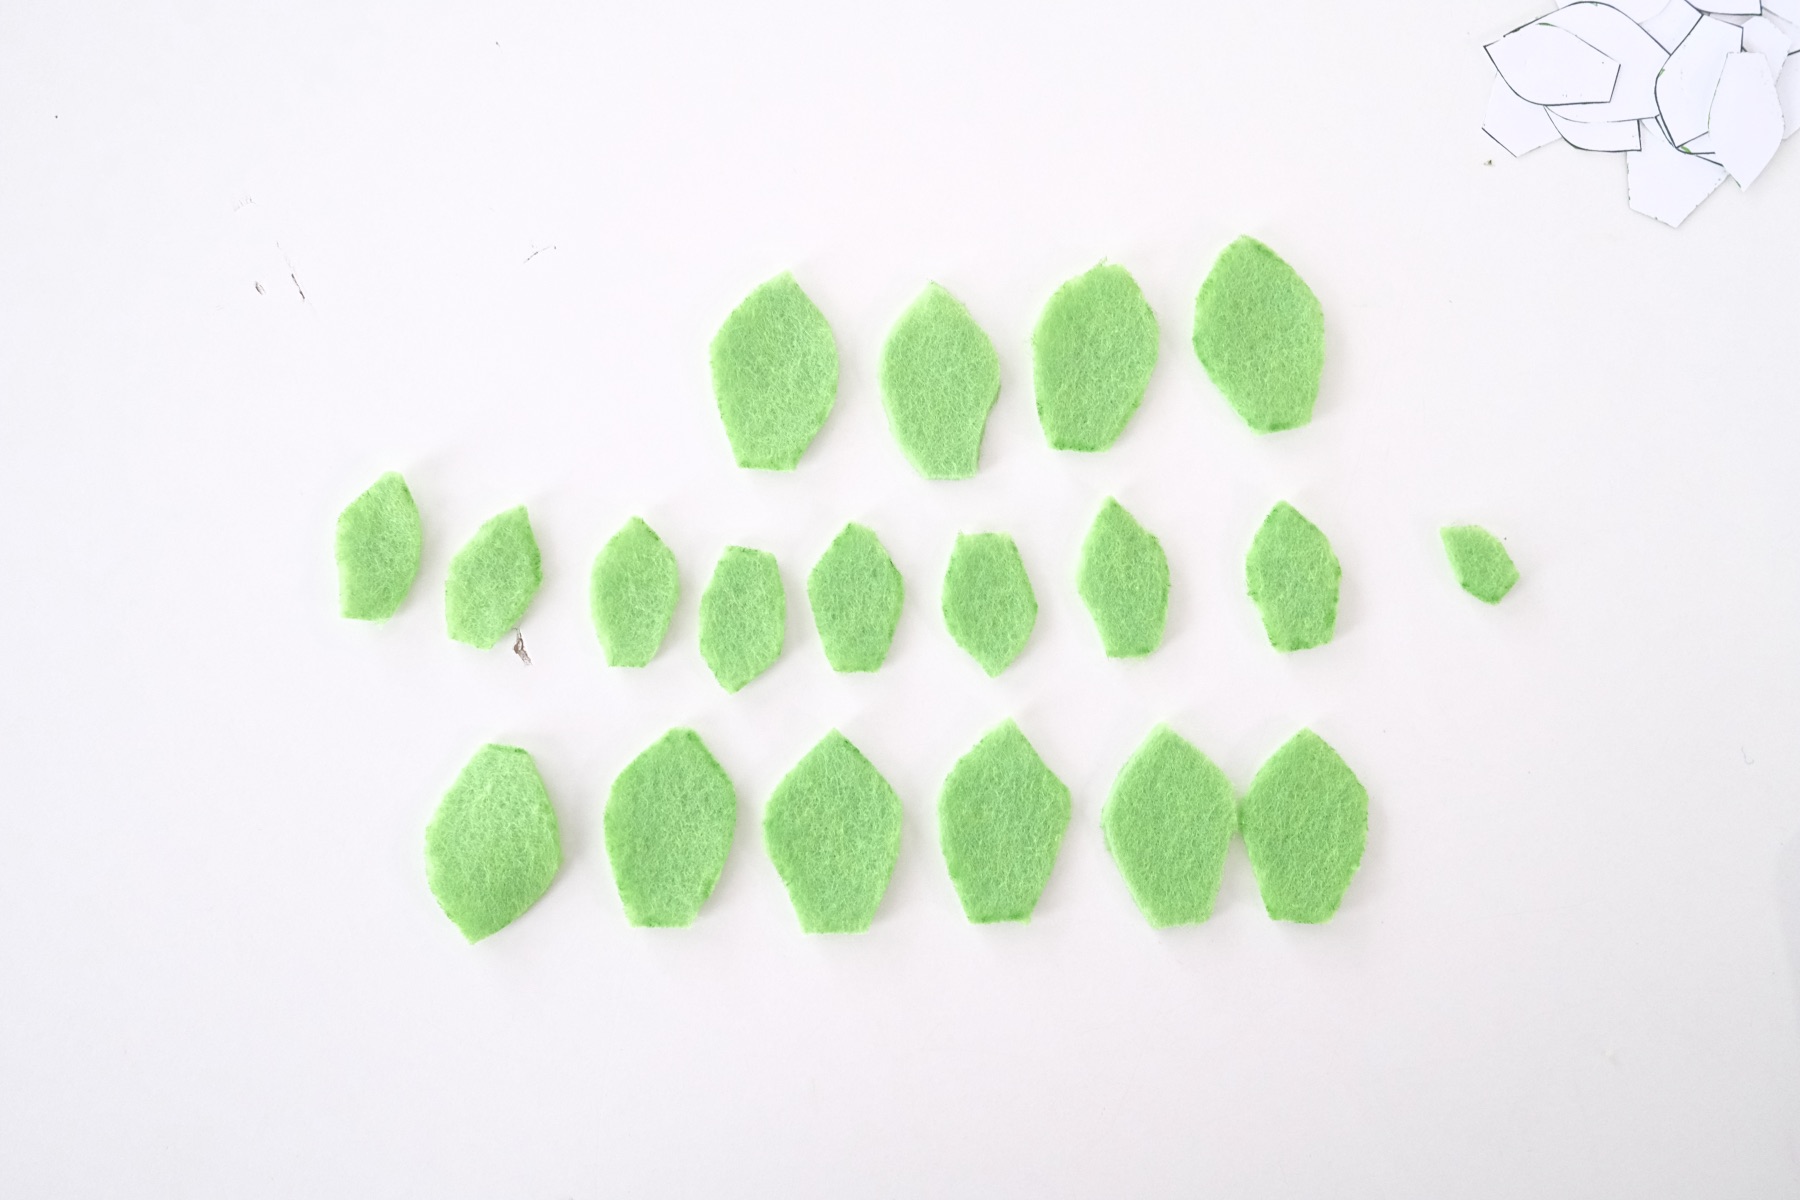 all the succulent leaves cut